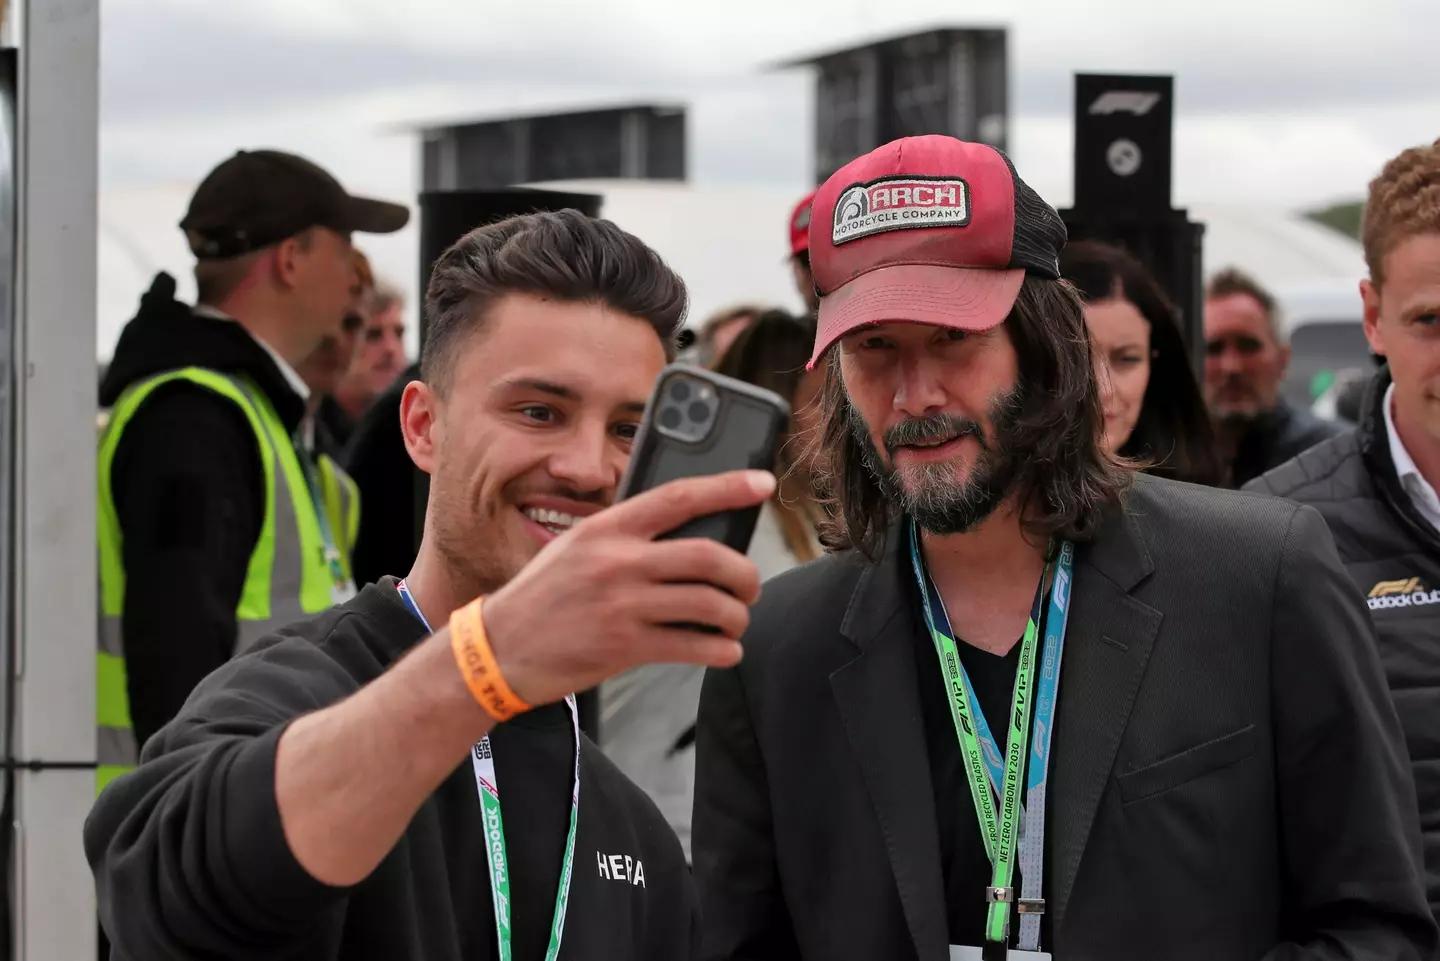 Keanu is known for taking time out with fans.